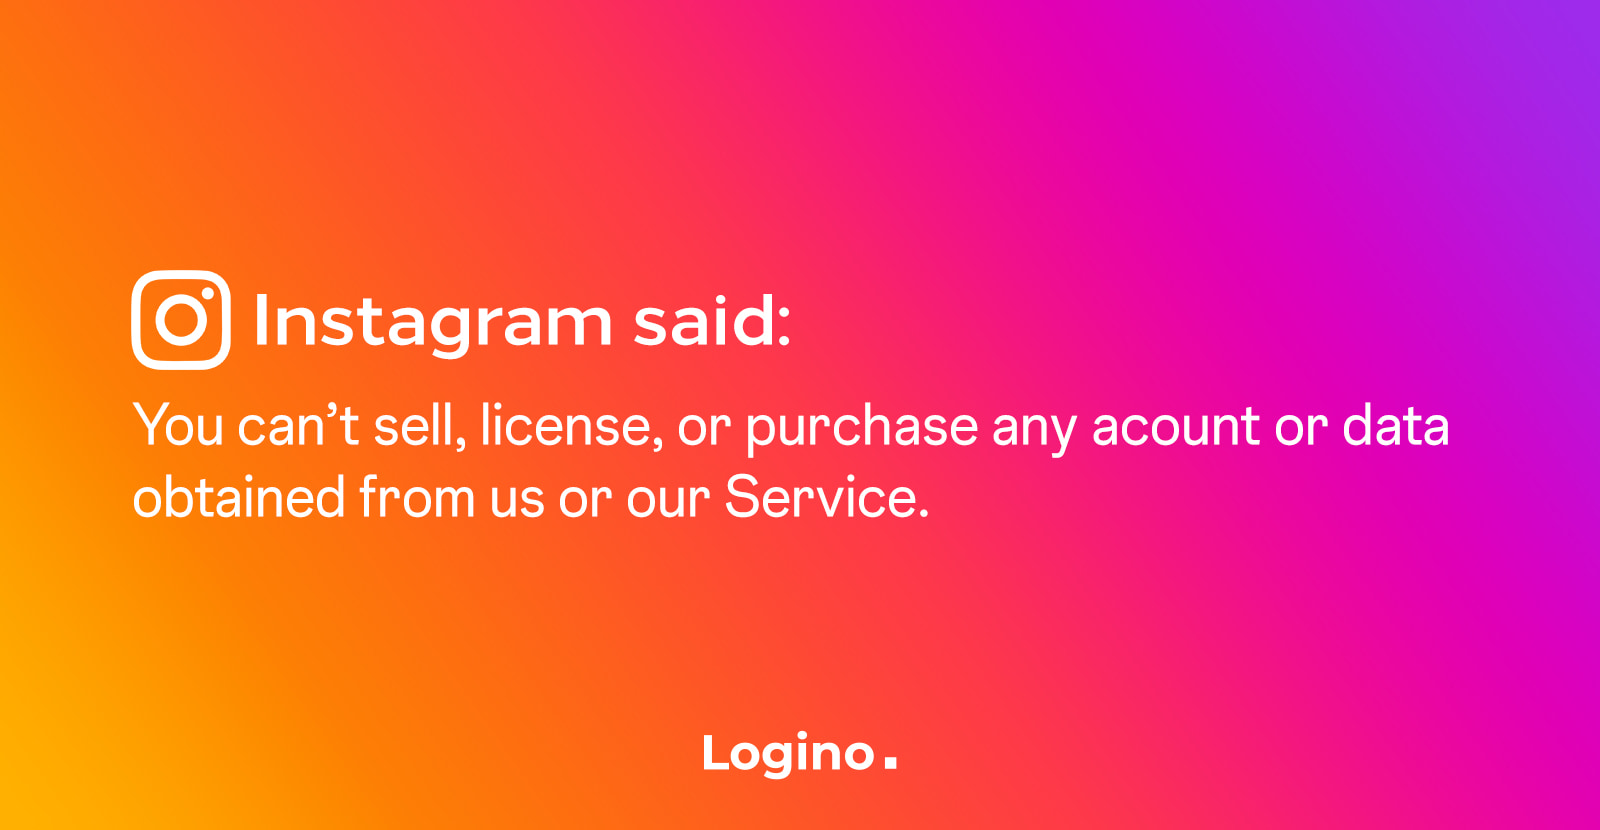 Instagram's policy for selling or buying Instagram accounts